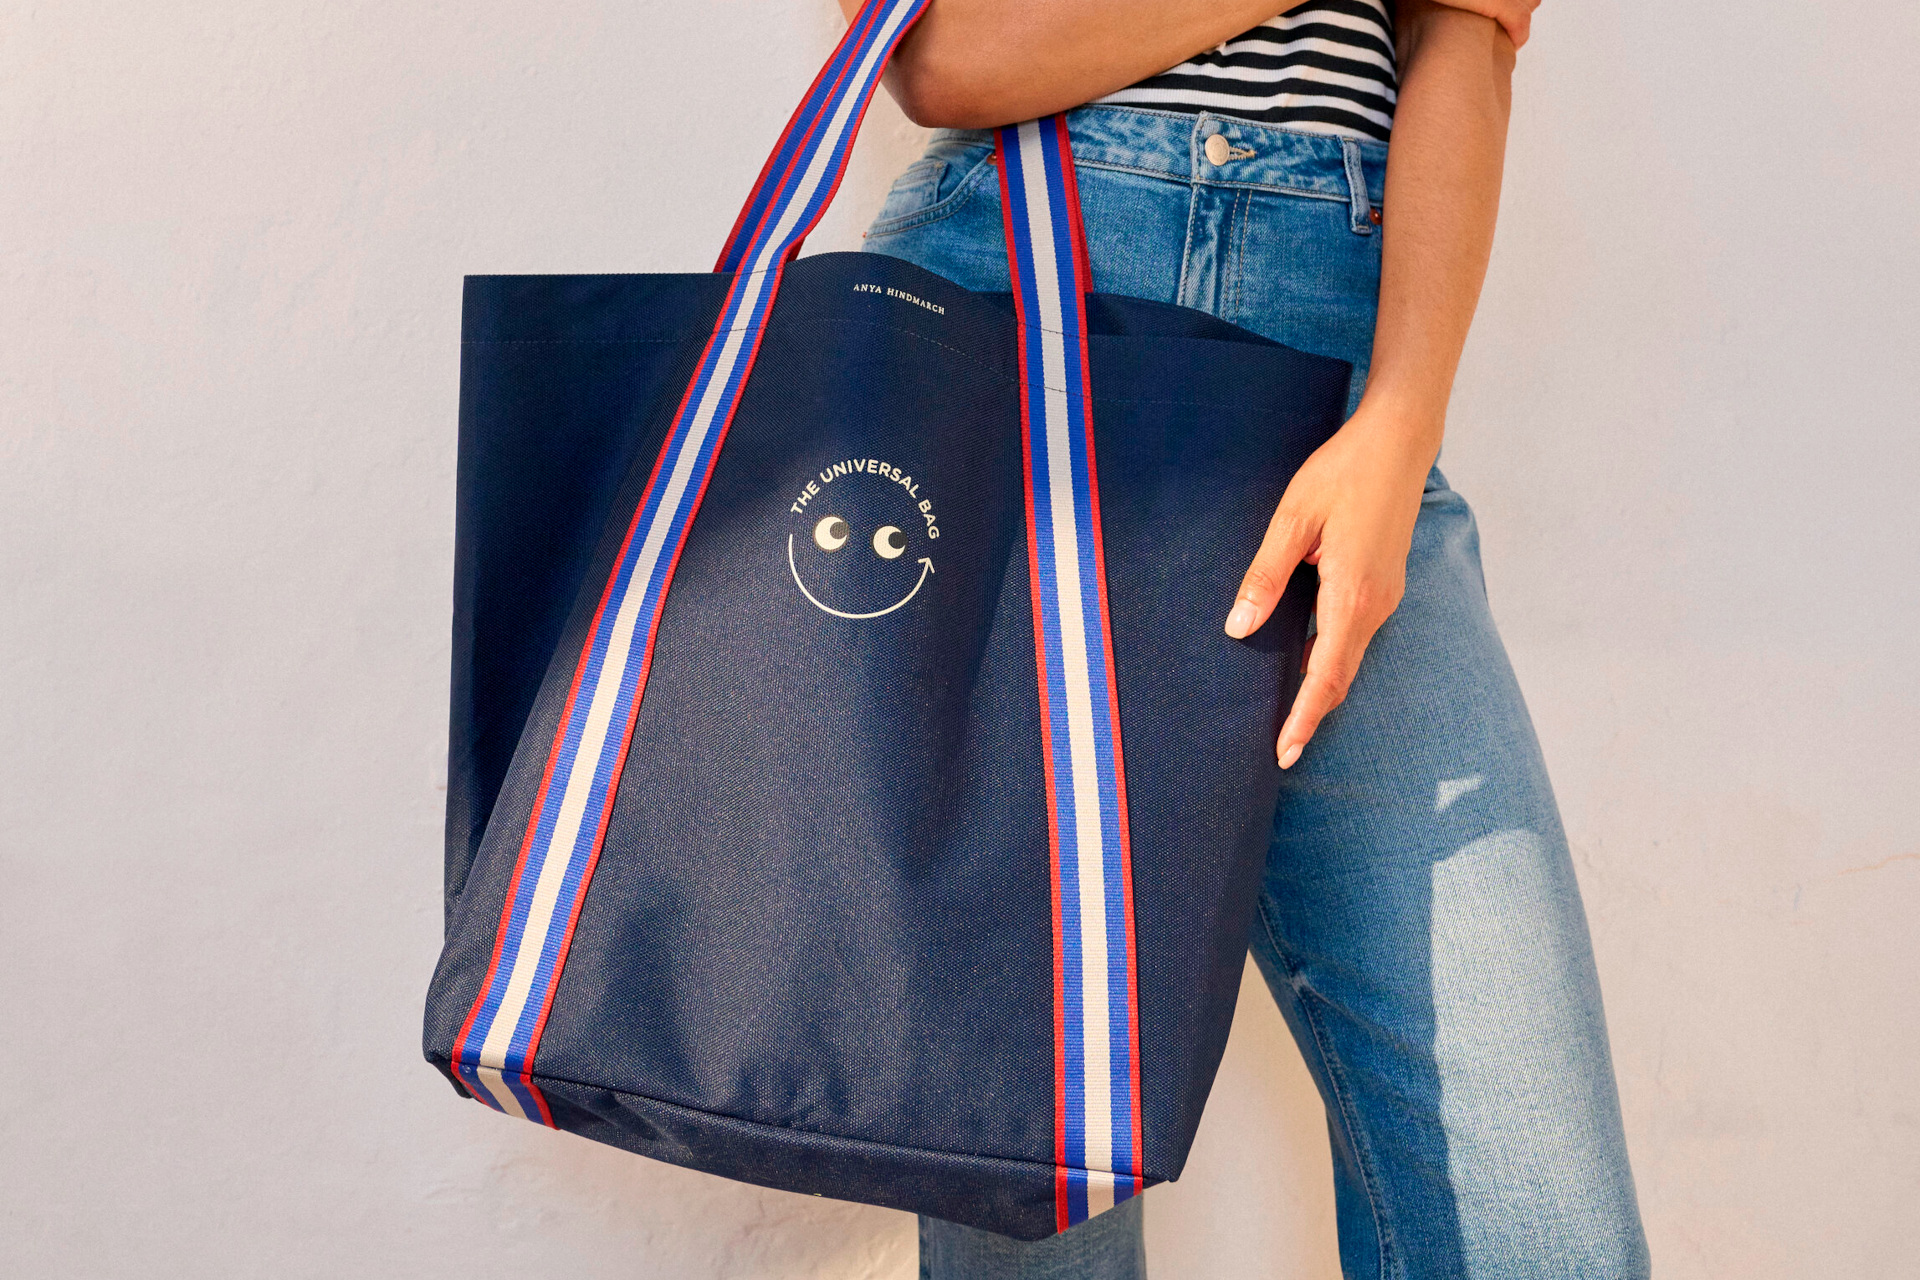 AnyaHindmarch: The latest Universal Bag has arrived